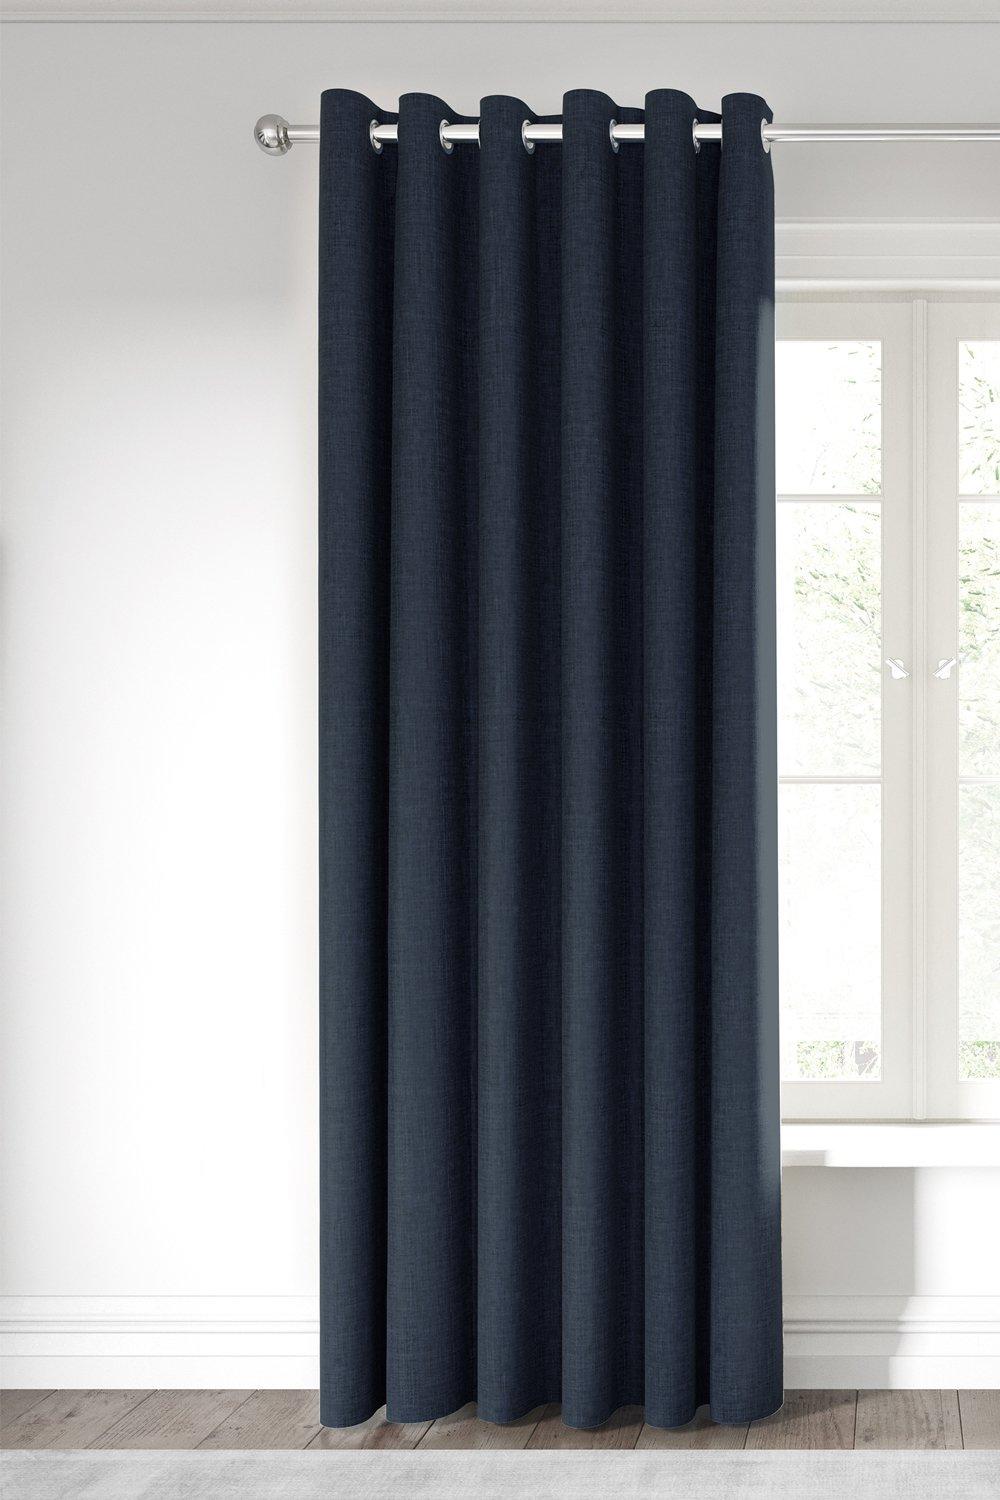 'Kalo' Lined Curtains